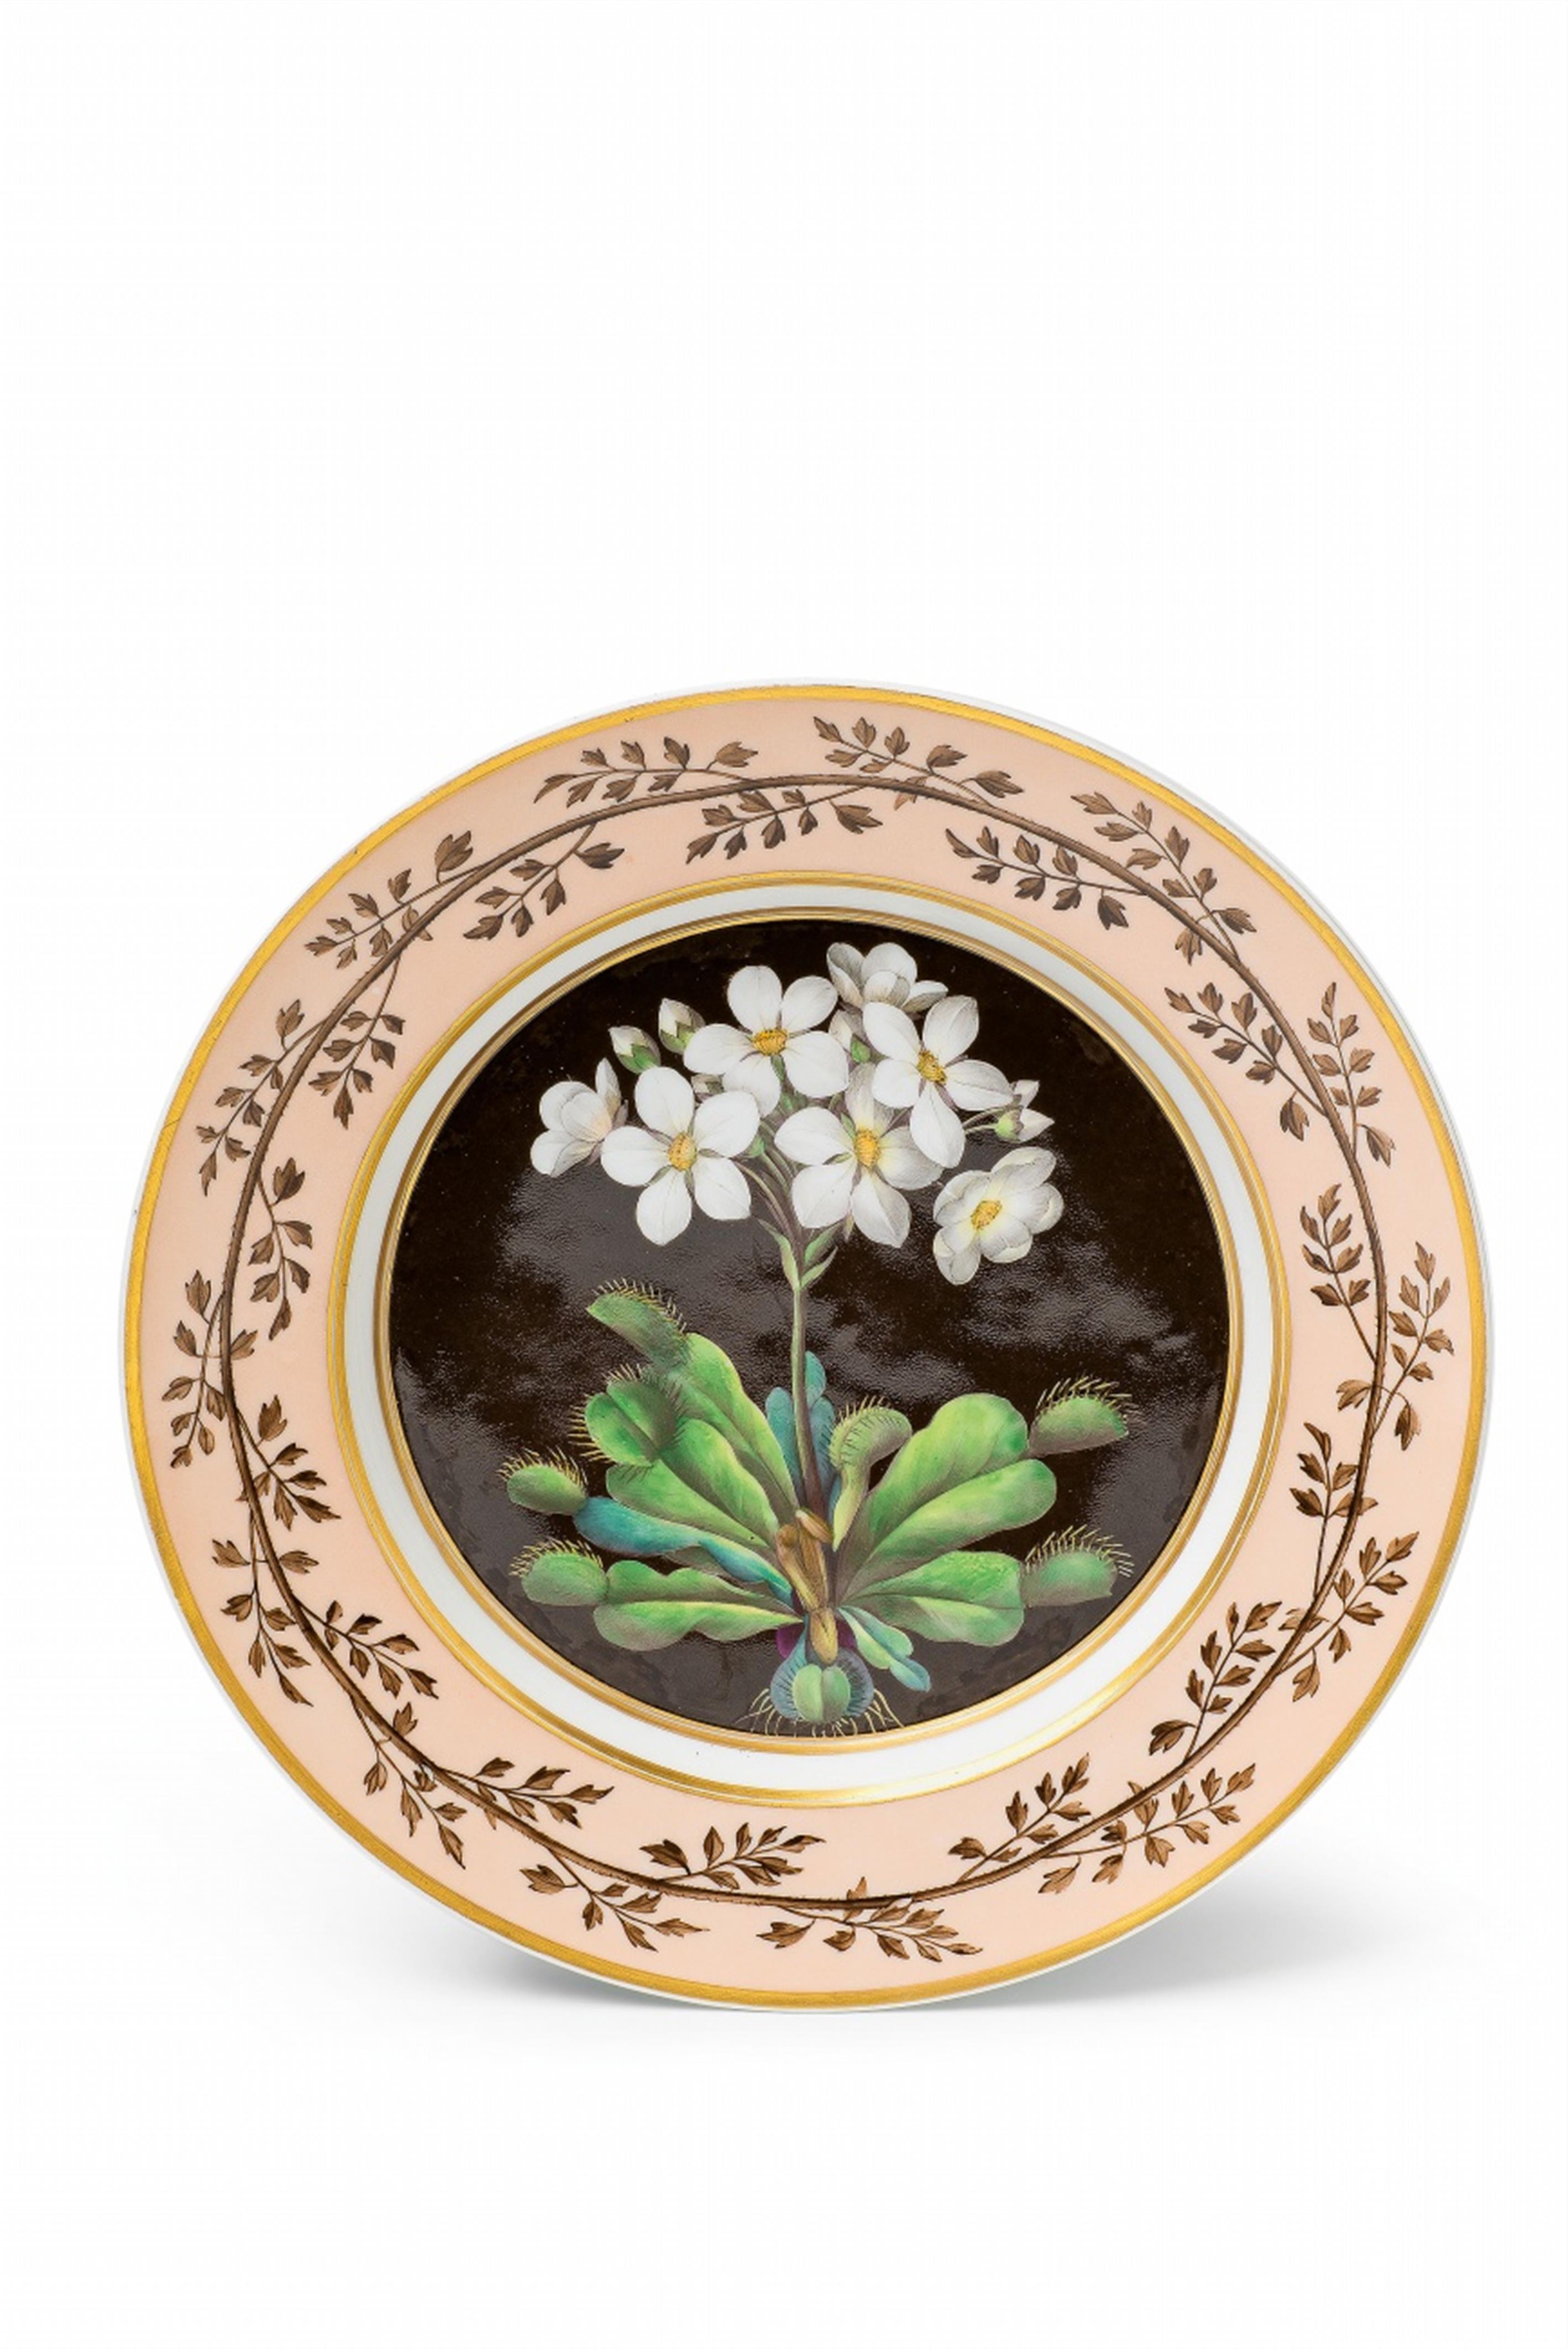 A Berlin KPM porcelain plate with a Venus fly trap - image-1